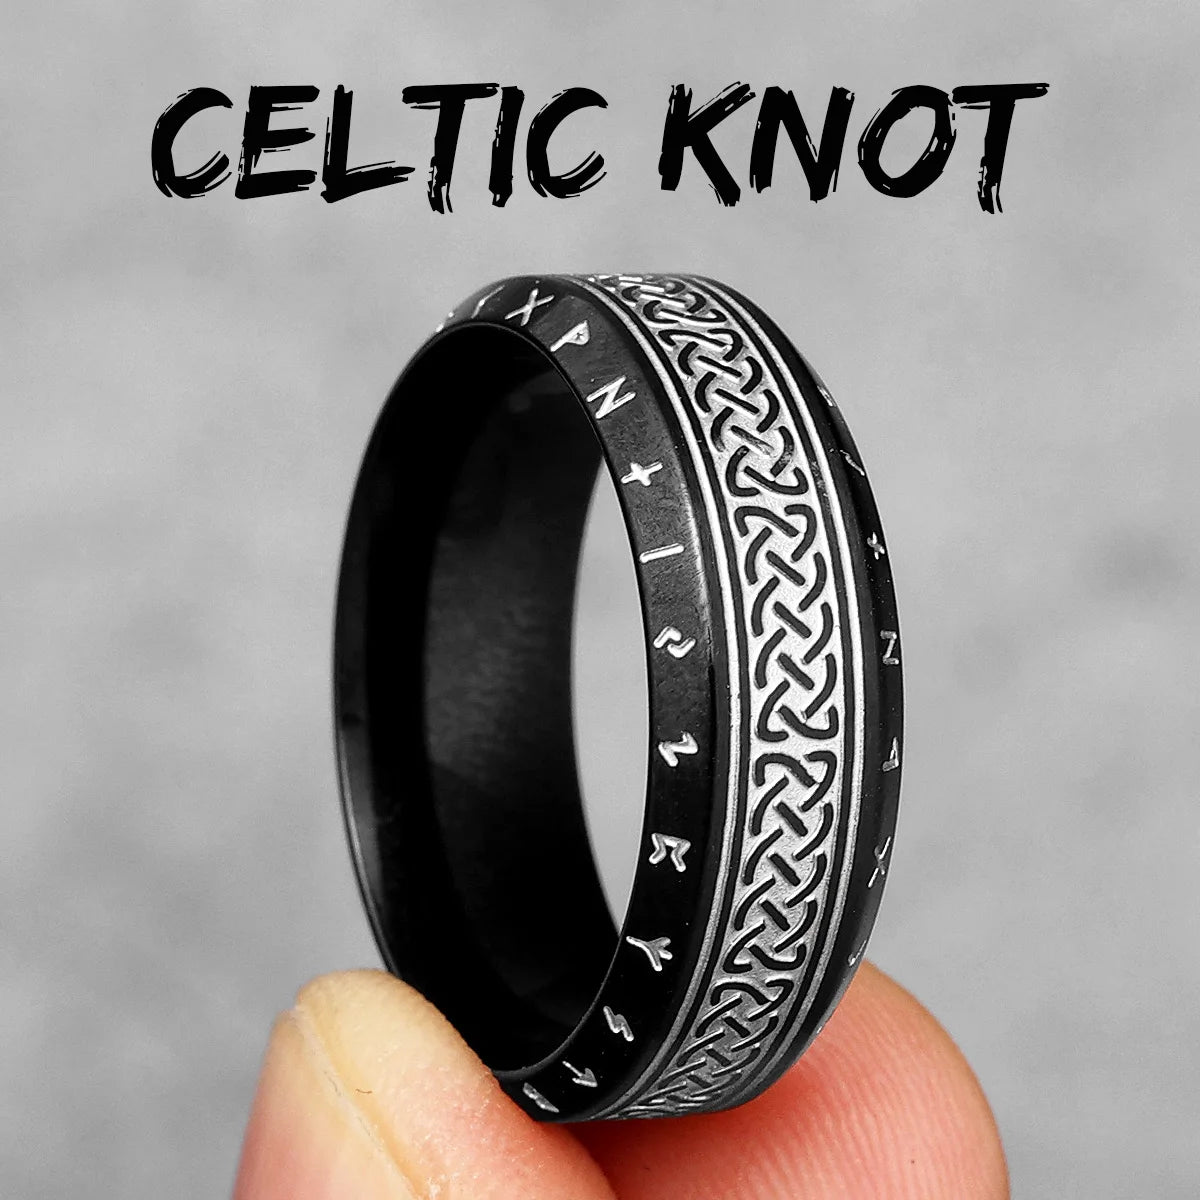 Black Edition - Viking Runes Celtic Knot Rings - Mythical Pieces 11 / R1007-Black